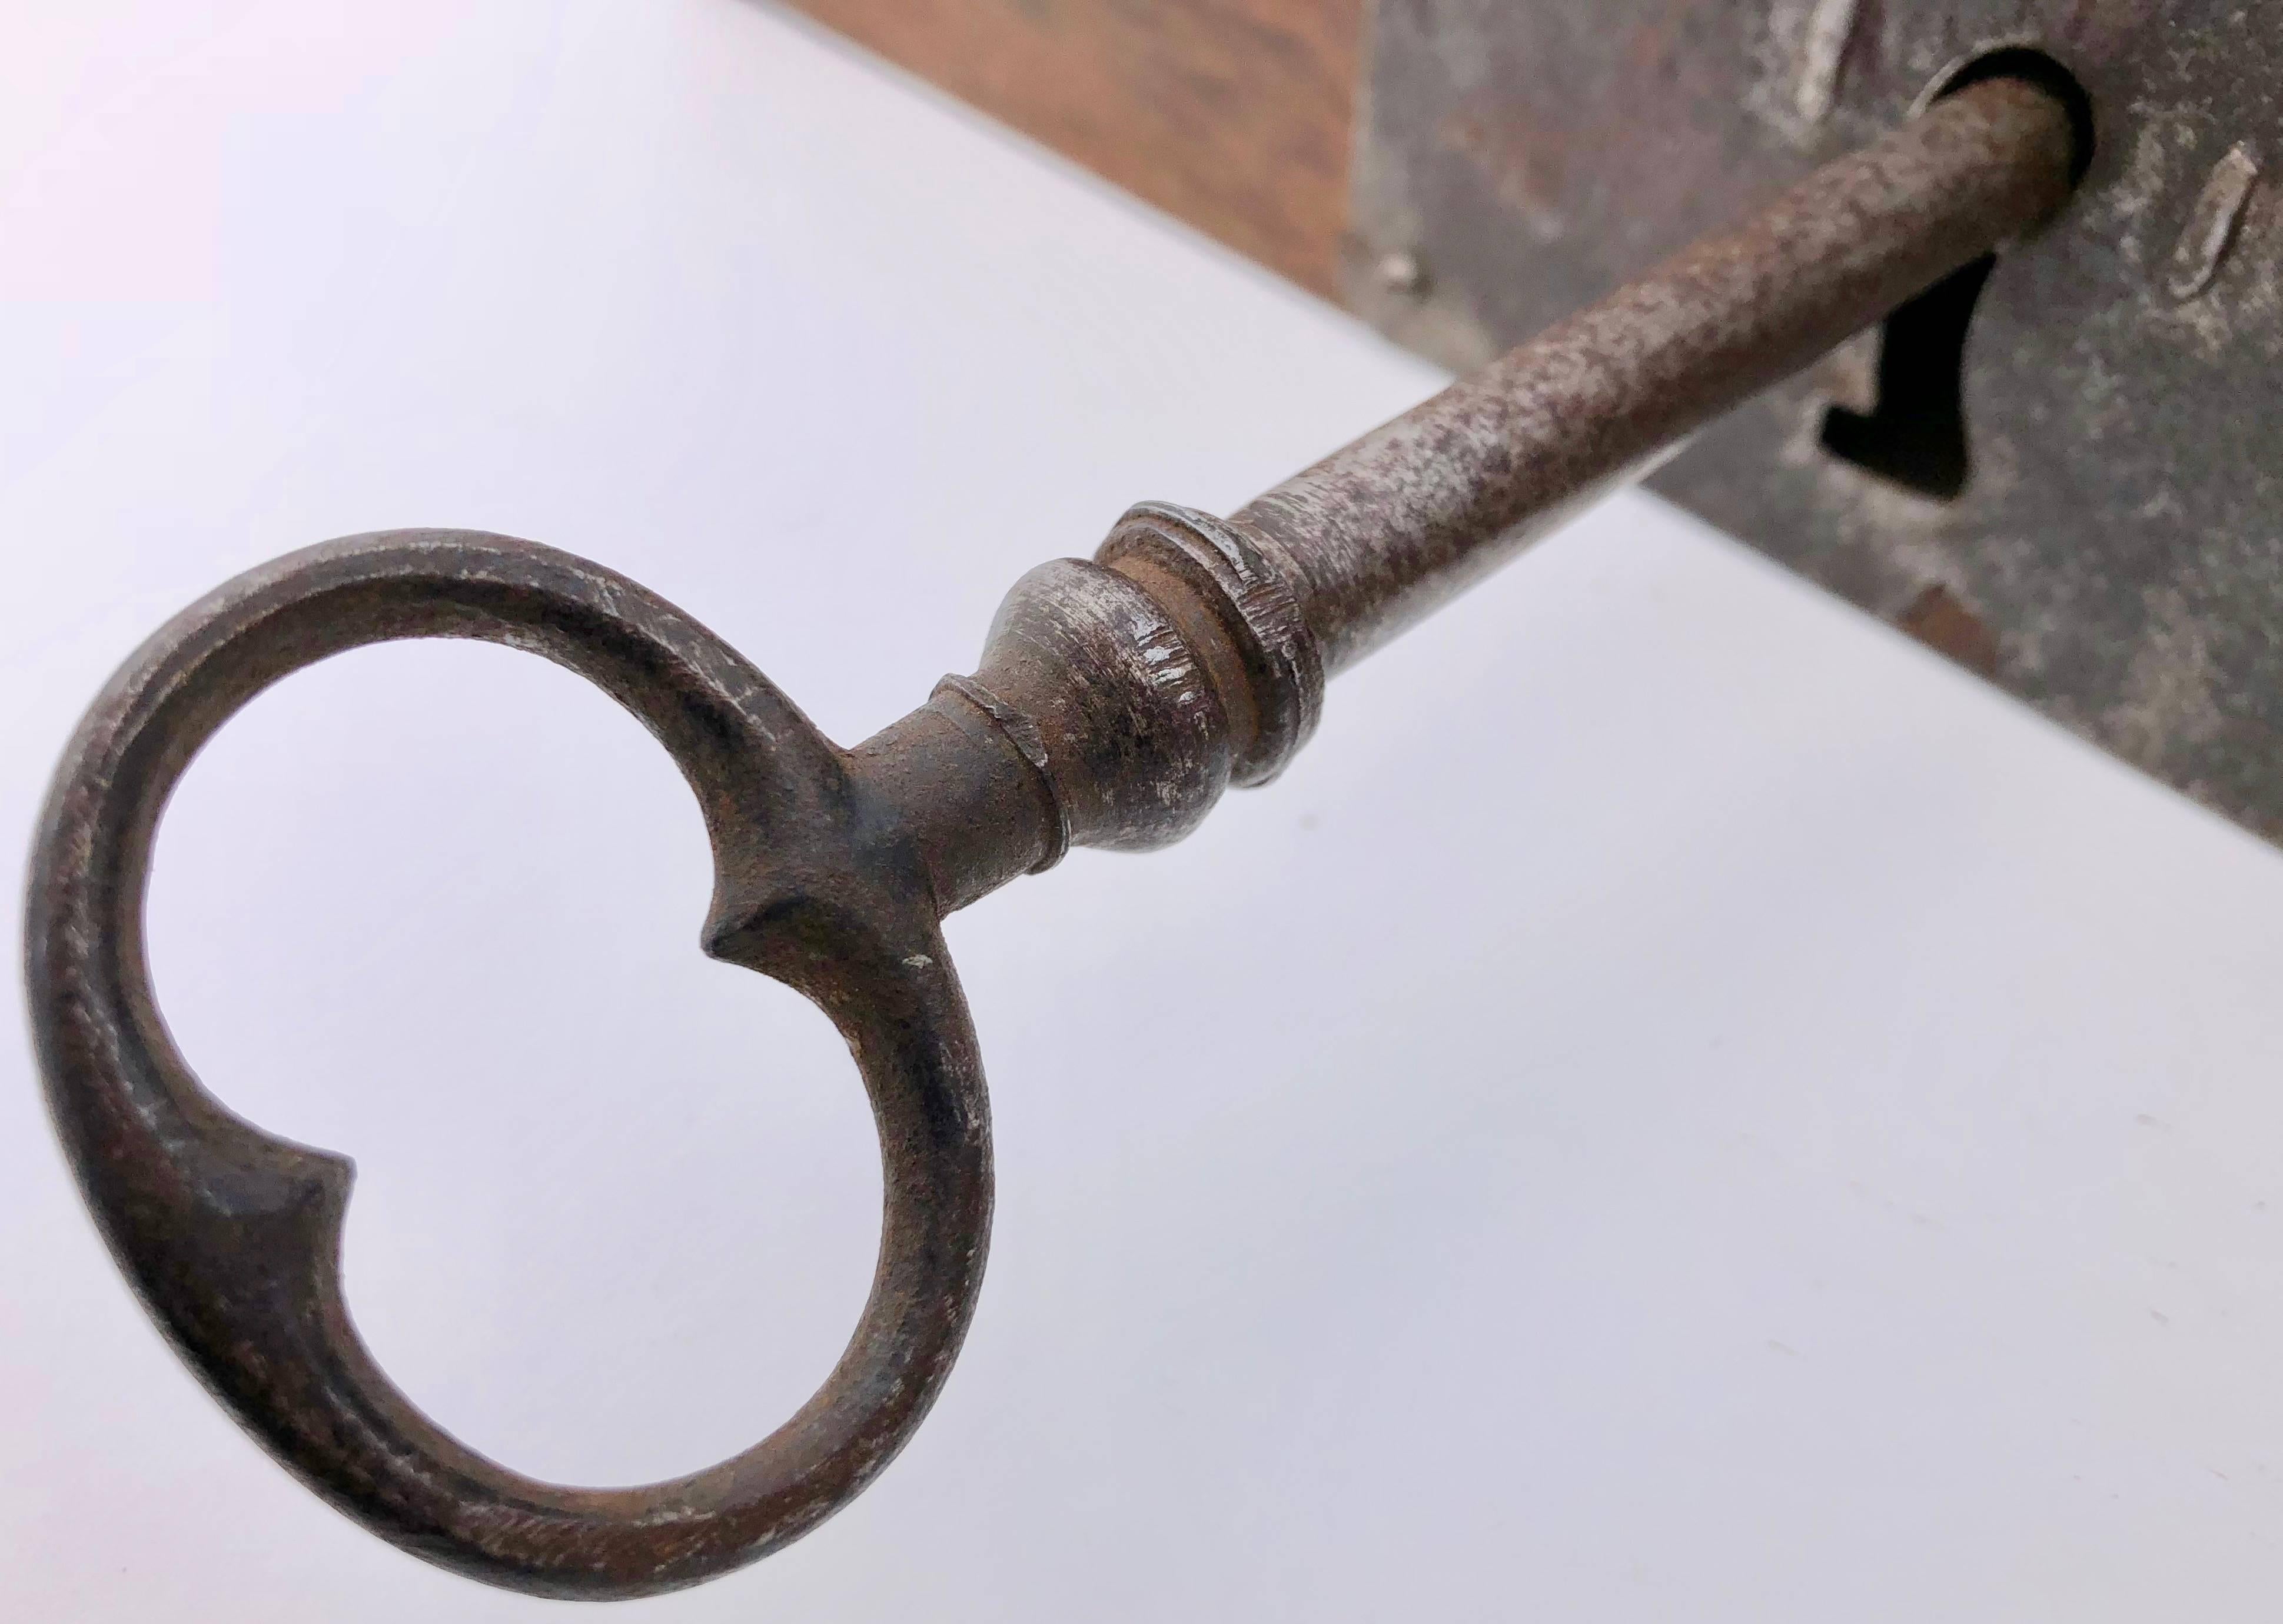 French Hand-Wrought Iron Mortise Mount Lock with Key on Wood Base, 1700s-1800s 1